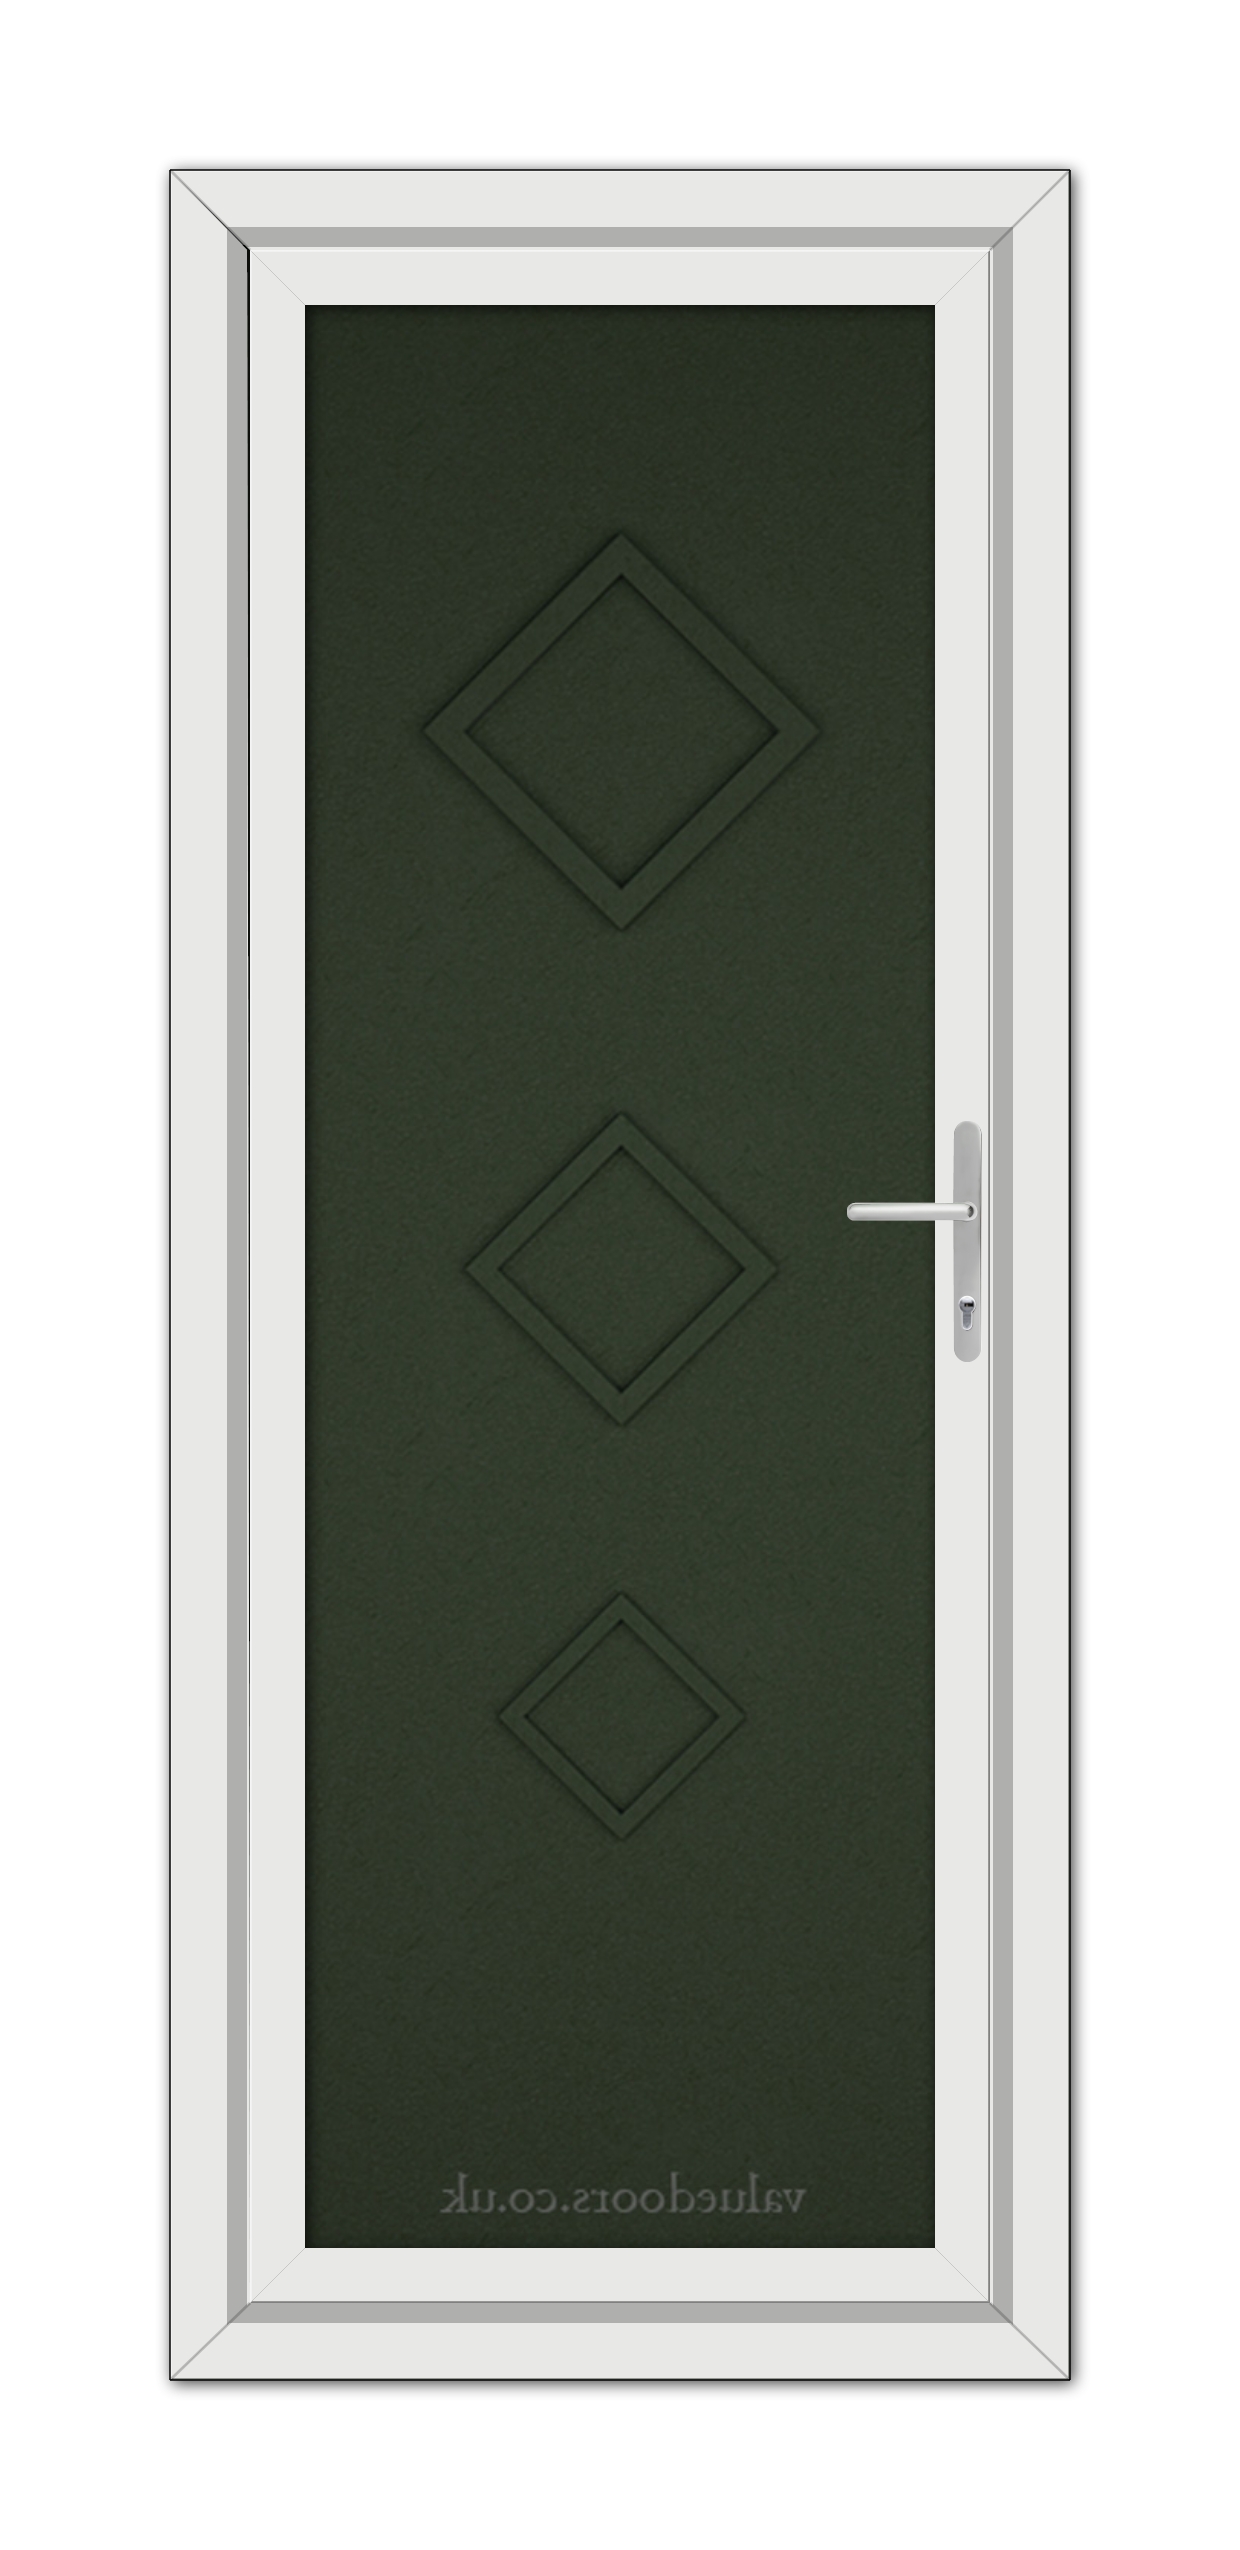 A white Green Modern 5123 Solid uPVC Door with a white frame.